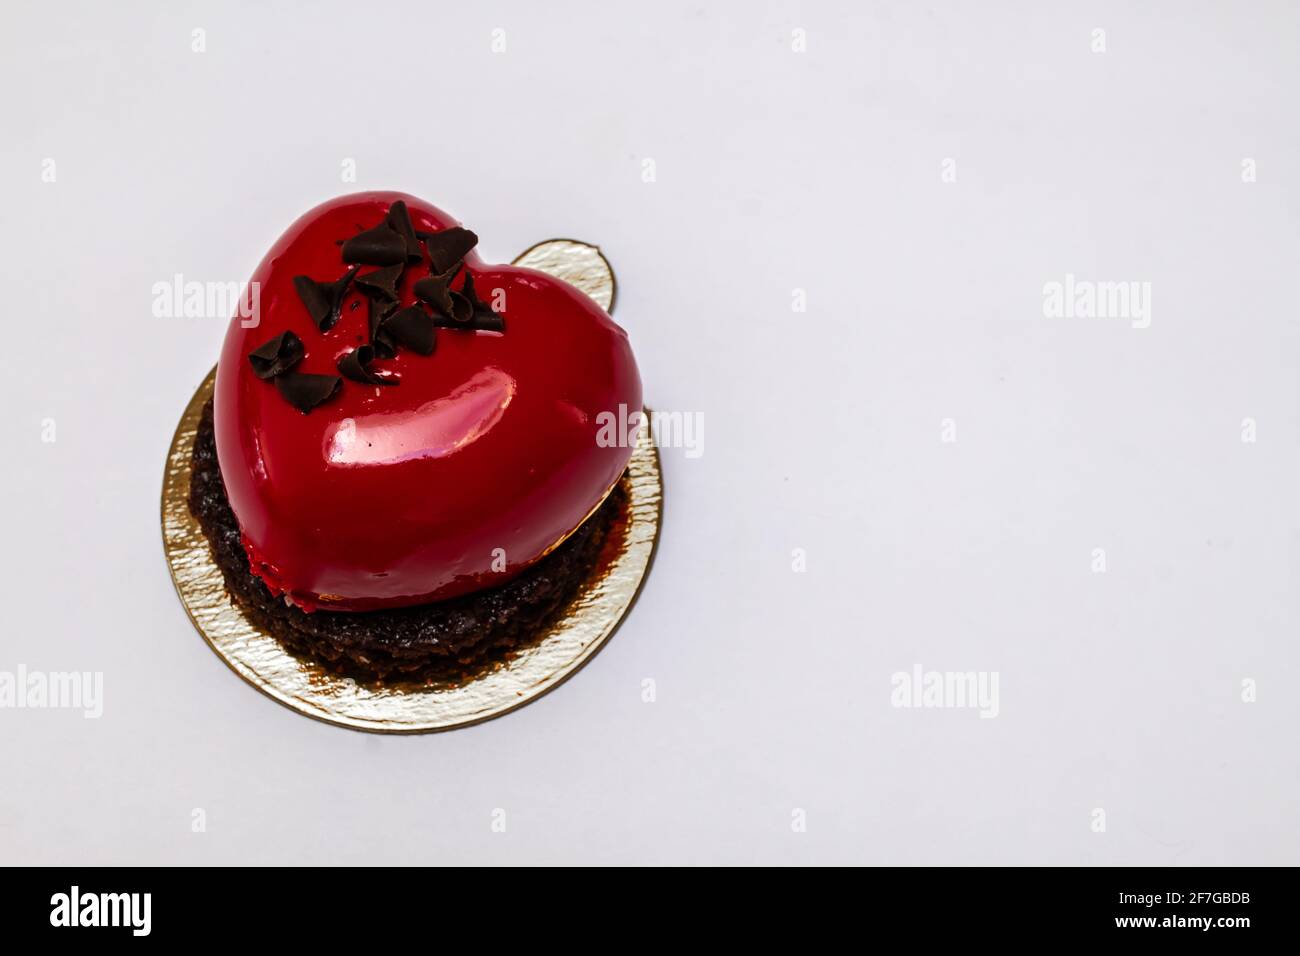 A heart-shaped, cherry-red champagne and berry chocolate miniature cake made for Valentine's Day 2021, Ontario, Canada. Stock Photo